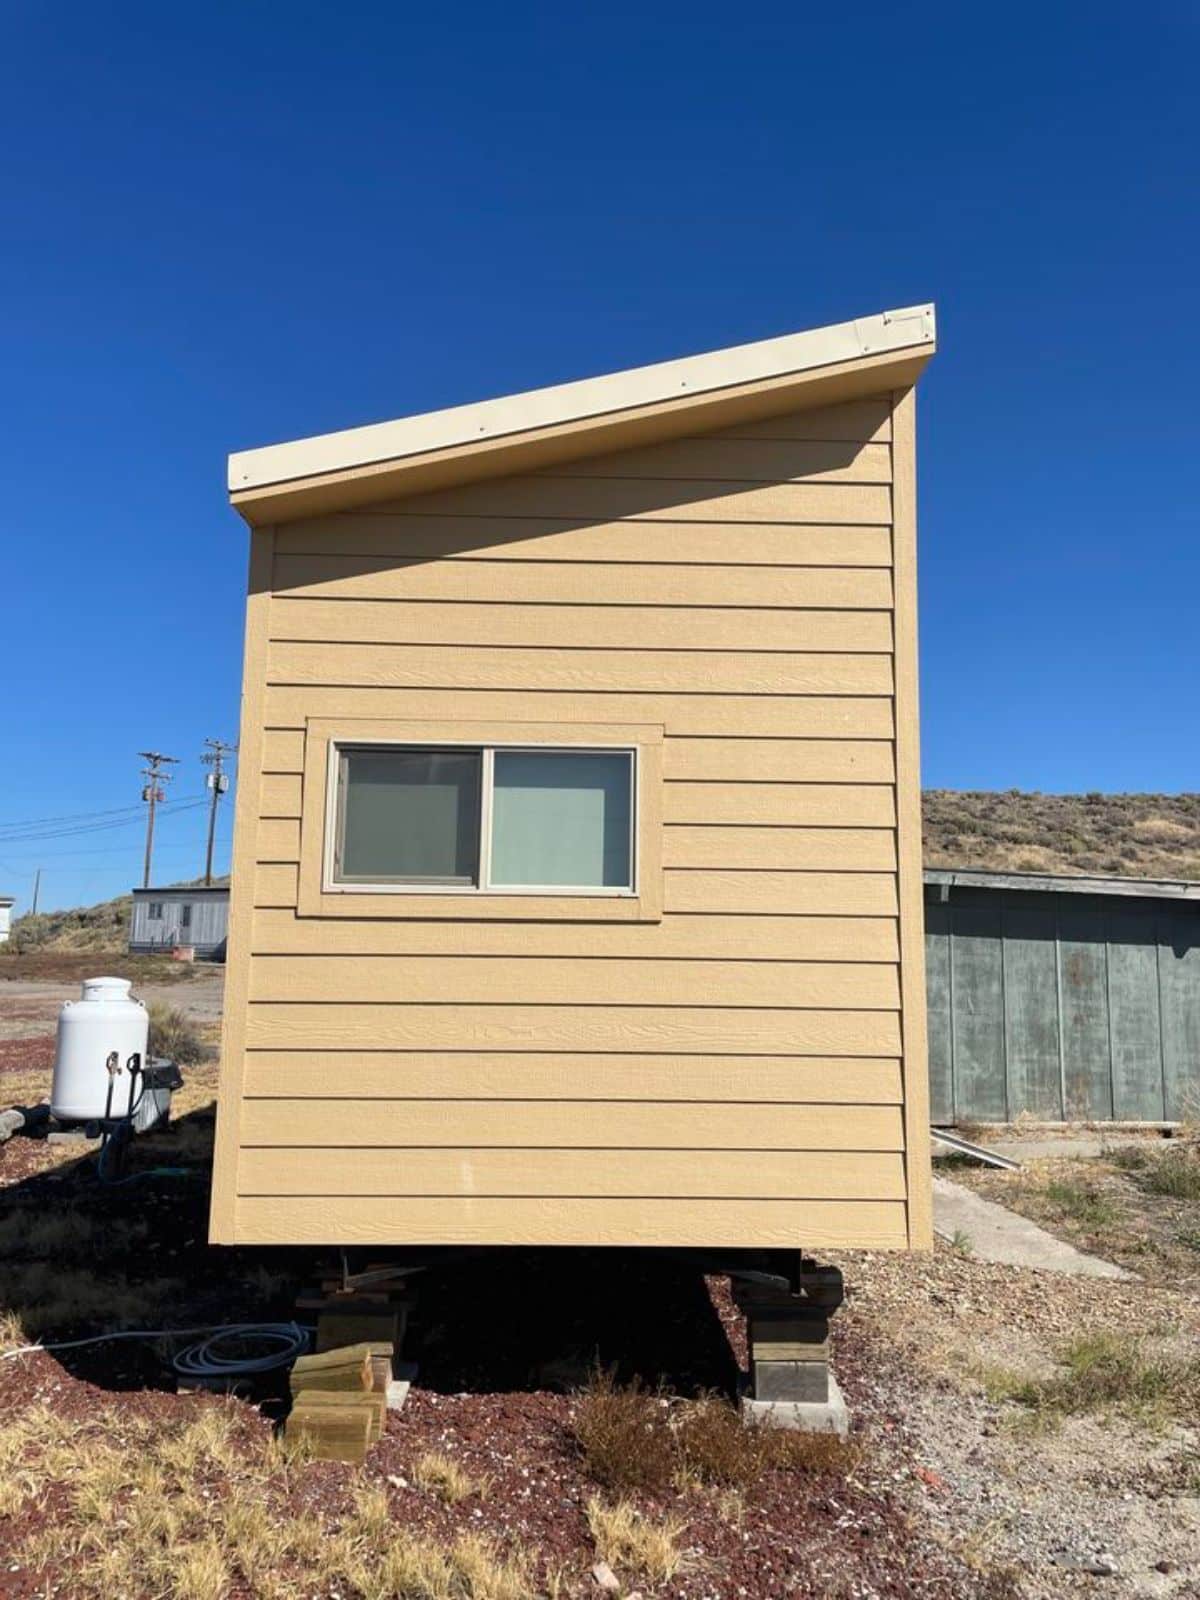 side view of custom tiny home from outside